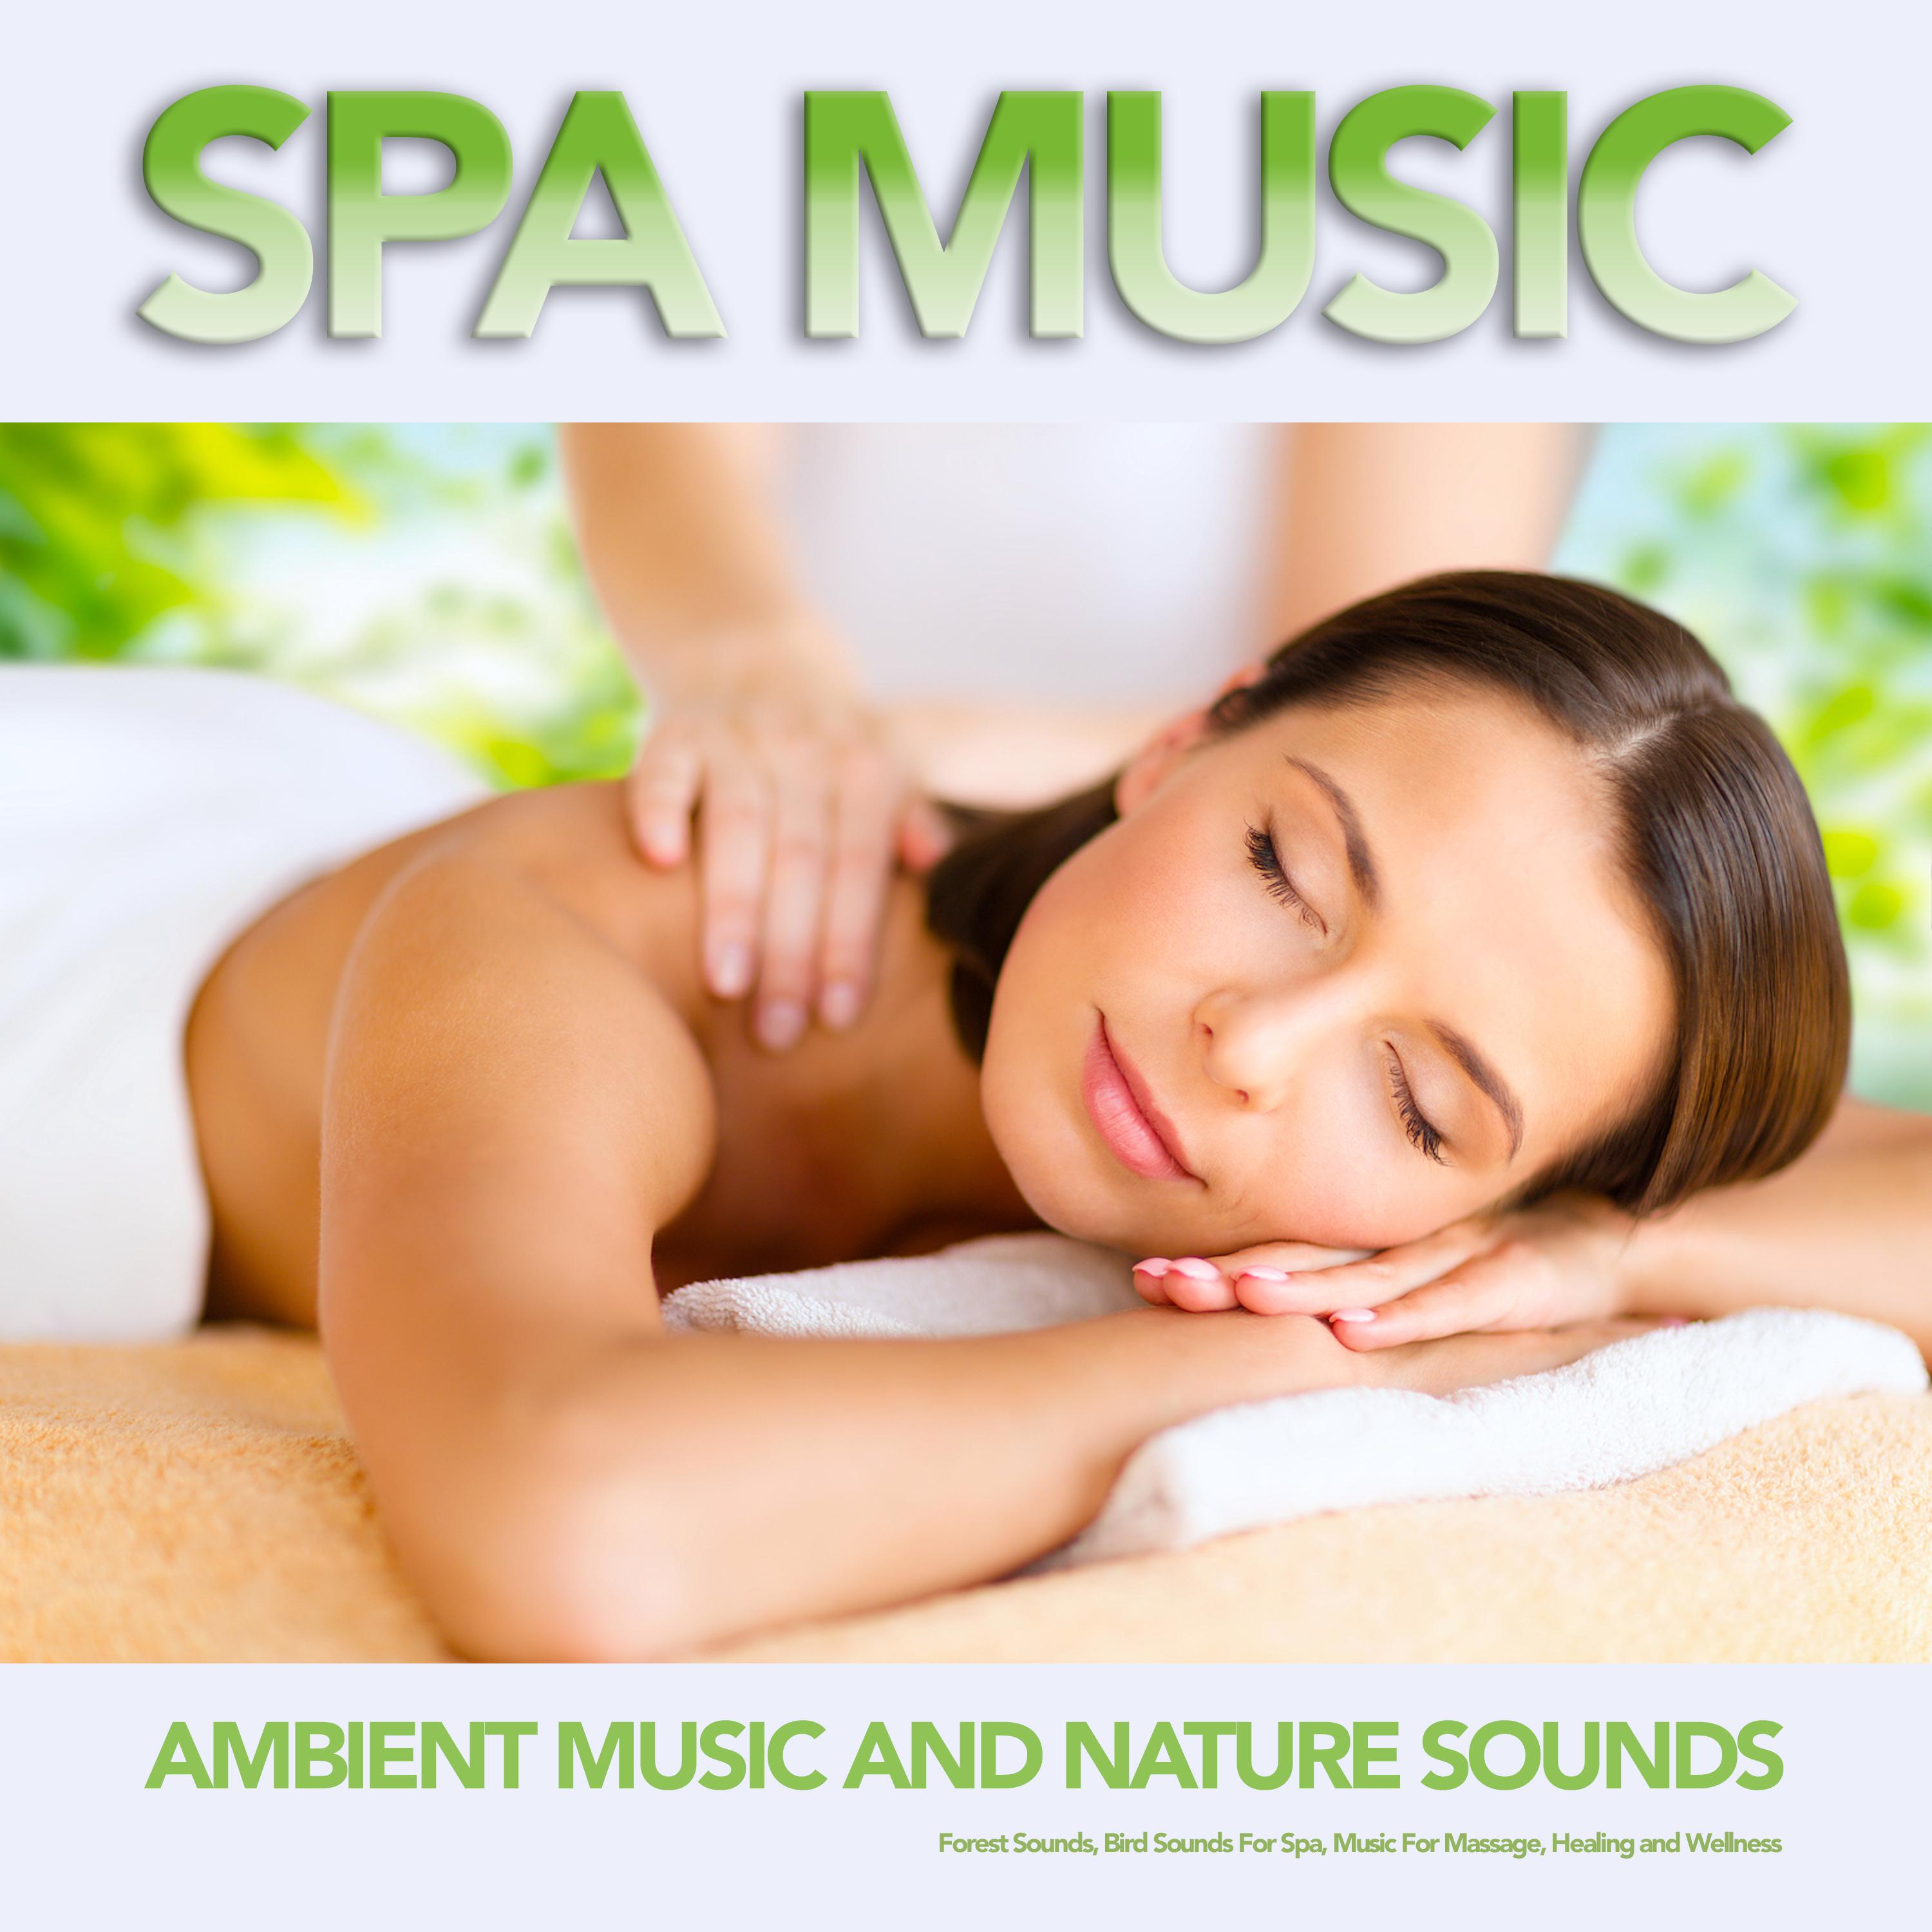 Spa Music: Ambient Music and Nature Sounds, Forest Sounds, Bird Sounds For Spa, Music For Massage, Healing and Wellness